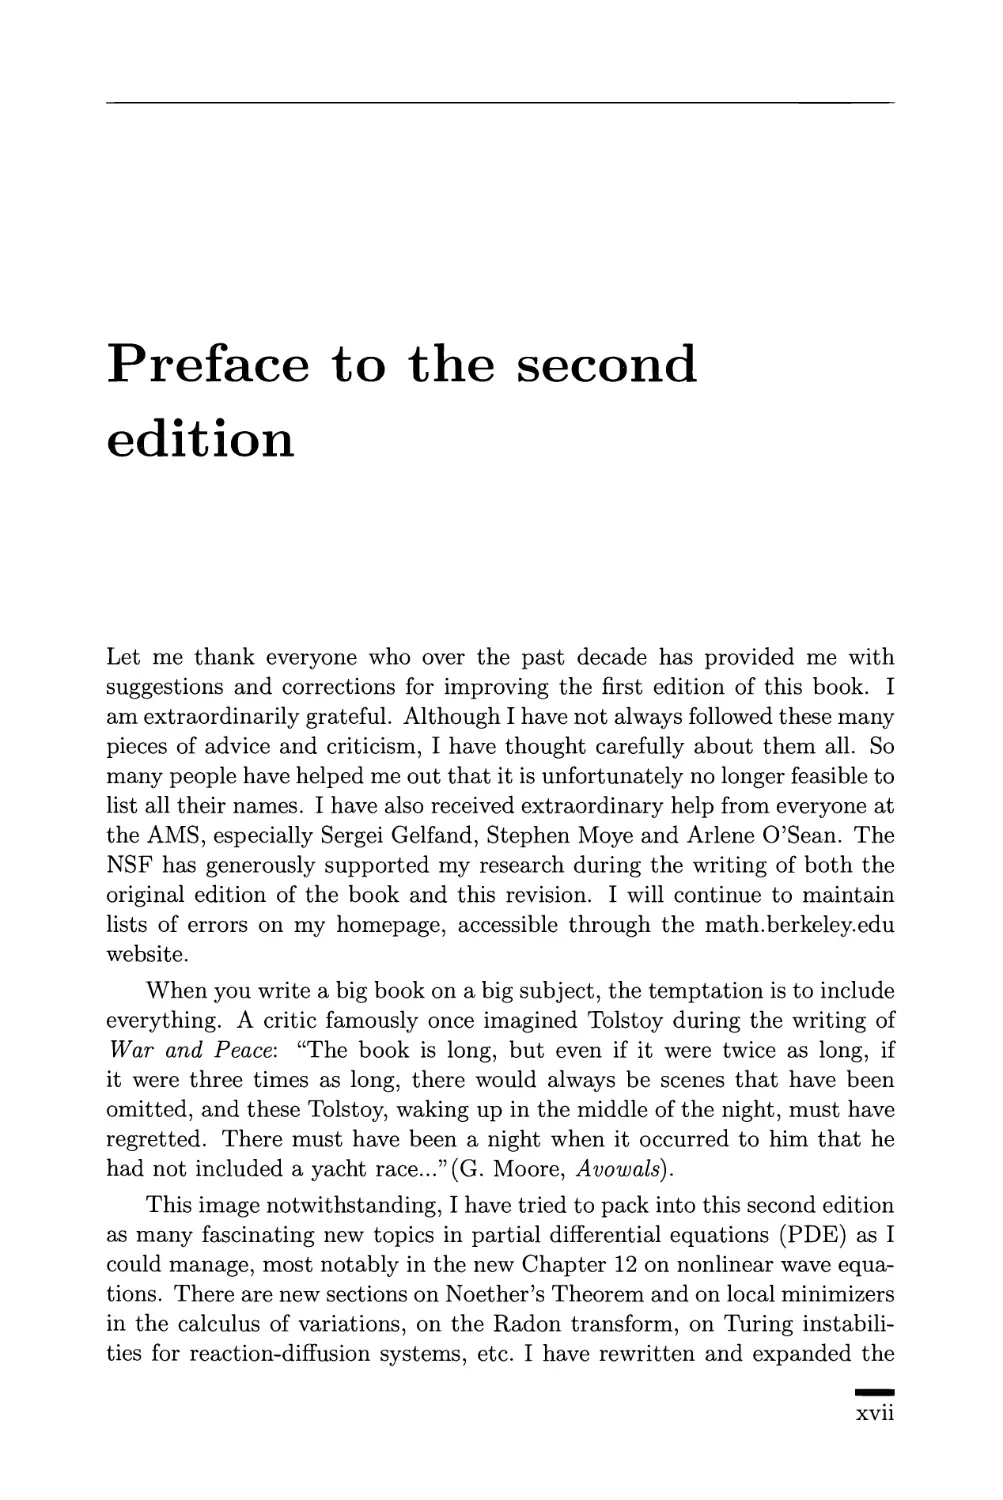 Preface to second edition